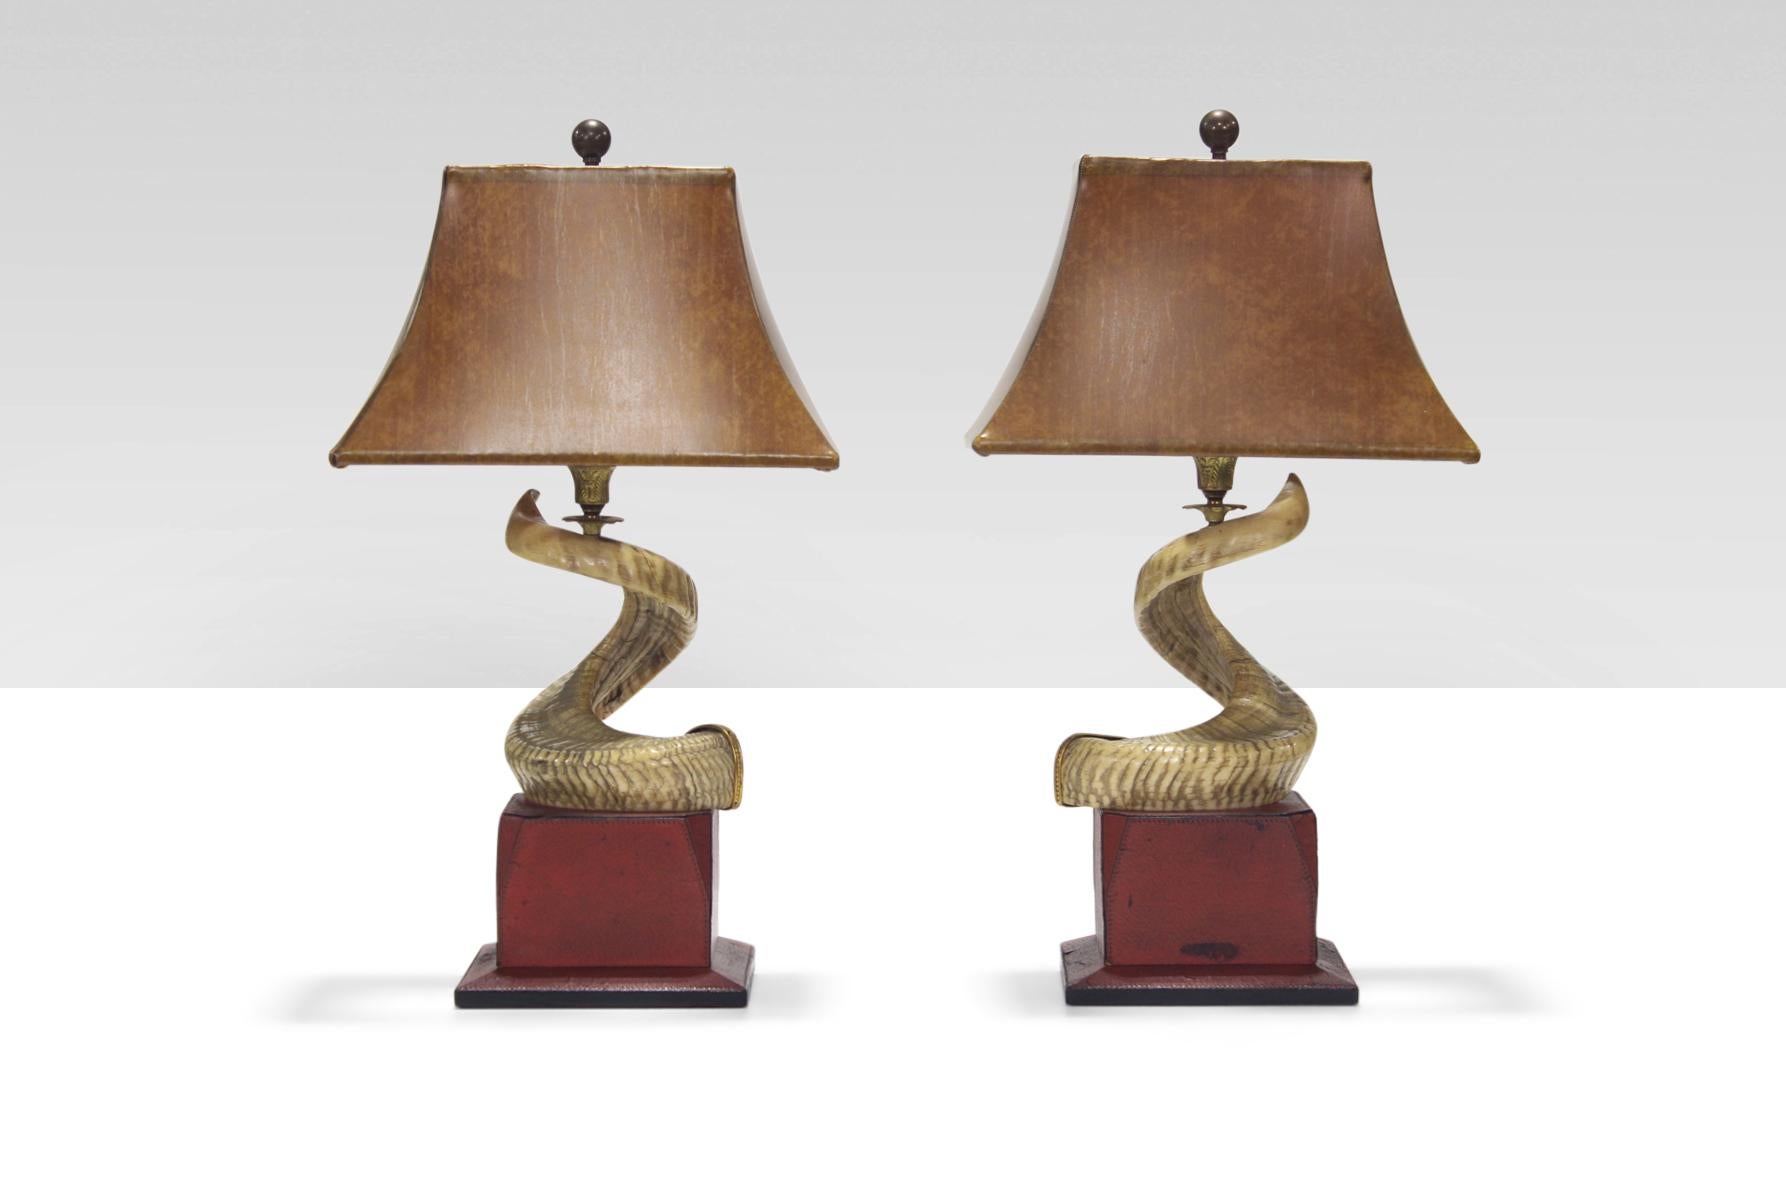 Pair of dramatic and decorative table lamps by Gucci. Various materials and refined detailing. Made in Italy circa the 1970s. Signed.